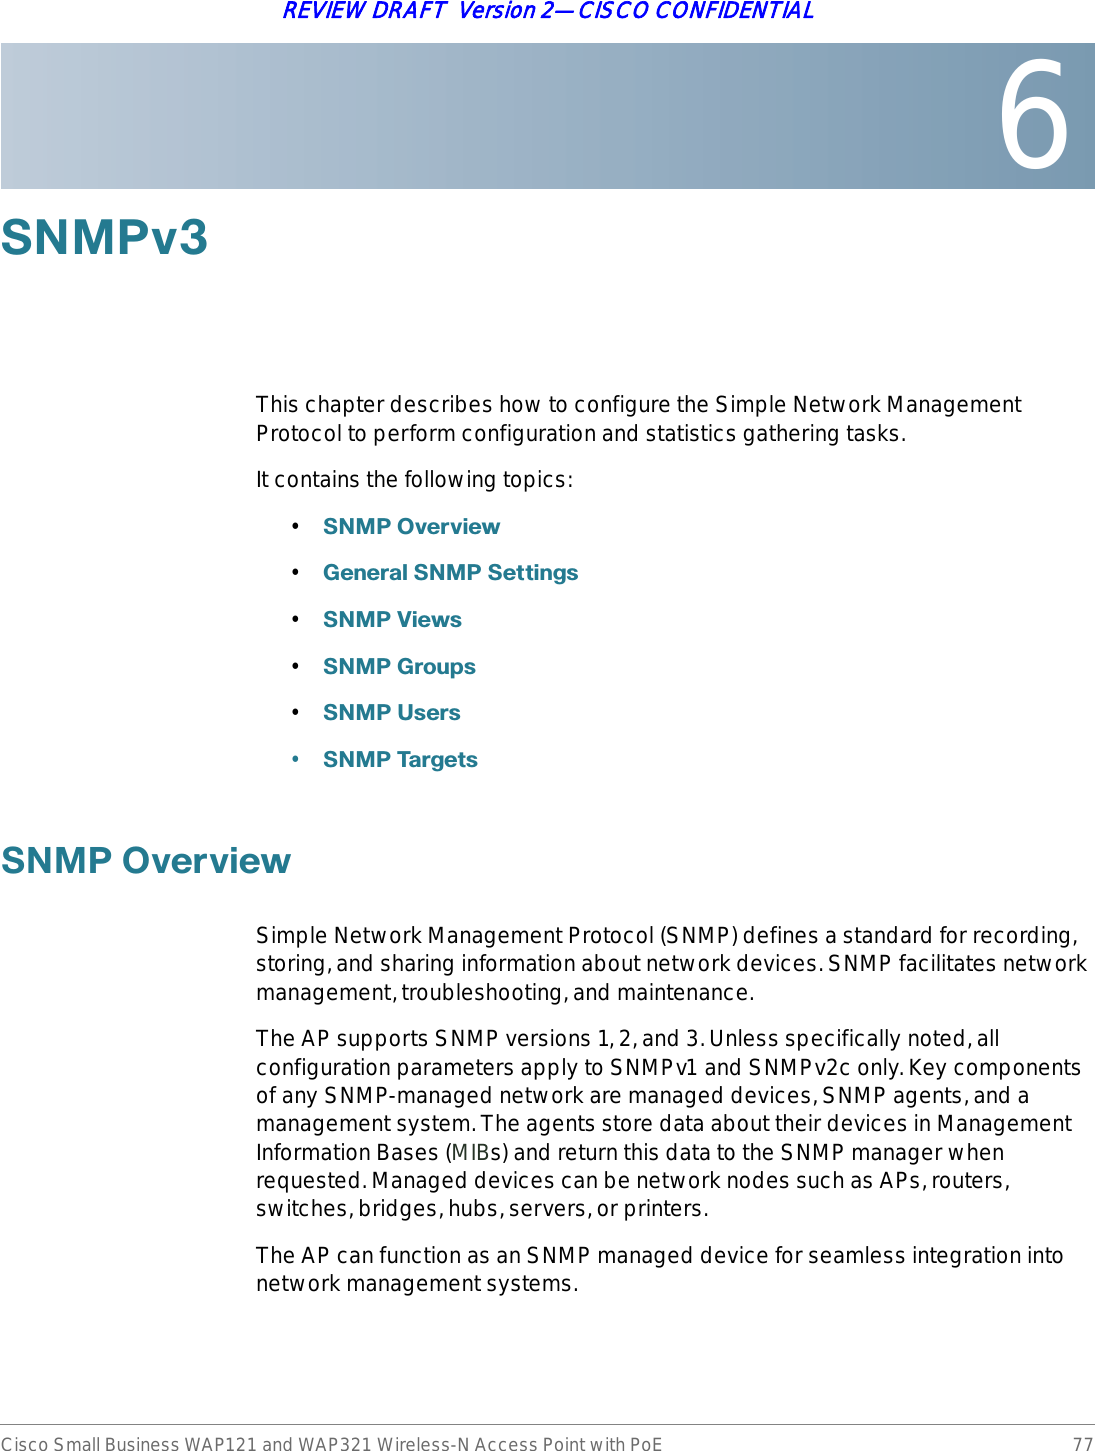 6Cisco Small Business WAP121 and WAP321 Wireless-N Access Point with PoE 77REVIEW DRAFT  Version 2—CISCO CONFIDENTIAL6103YThis chapter describes how to configure the Simple Network Management Protocol to perform configuration and statistics gathering tasks.It contains the following topics:•61032YHUYLHZ•*HQHUDO61036HWWLQJV•61039LHZV•6103*URXSV•61038VHUV•61037DUJHWV61032YHUYLHZSimple Network Management Protocol (SNMP) defines a standard for recording, storing, and sharing information about network devices. SNMP facilitates network management, troubleshooting, and maintenance. The AP supports SNMP versions 1, 2, and 3. Unless specifically noted, all configuration parameters apply to SNMPv1 and SNMPv2c only. Key components of any SNMP-managed network are managed devices, SNMP agents, and a management system. The agents store data about their devices in Management Information Bases (MIBs) and return this data to the SNMP manager when requested. Managed devices can be network nodes such as APs, routers, switches, bridges, hubs, servers, or printers.The AP can function as an SNMP managed device for seamless integration into network management systems.